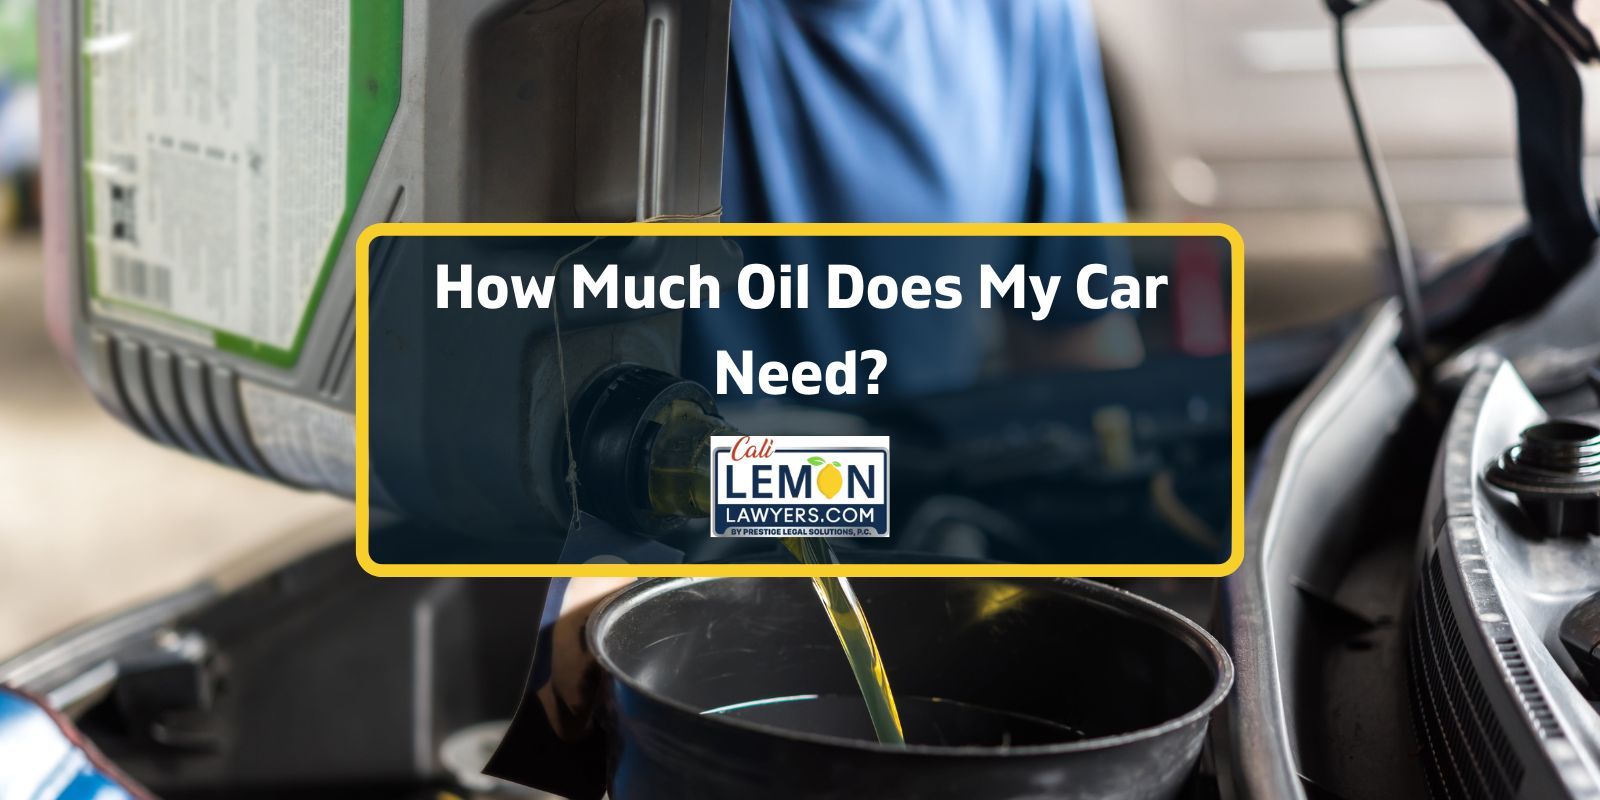 How Much Oil Does My Car Need?